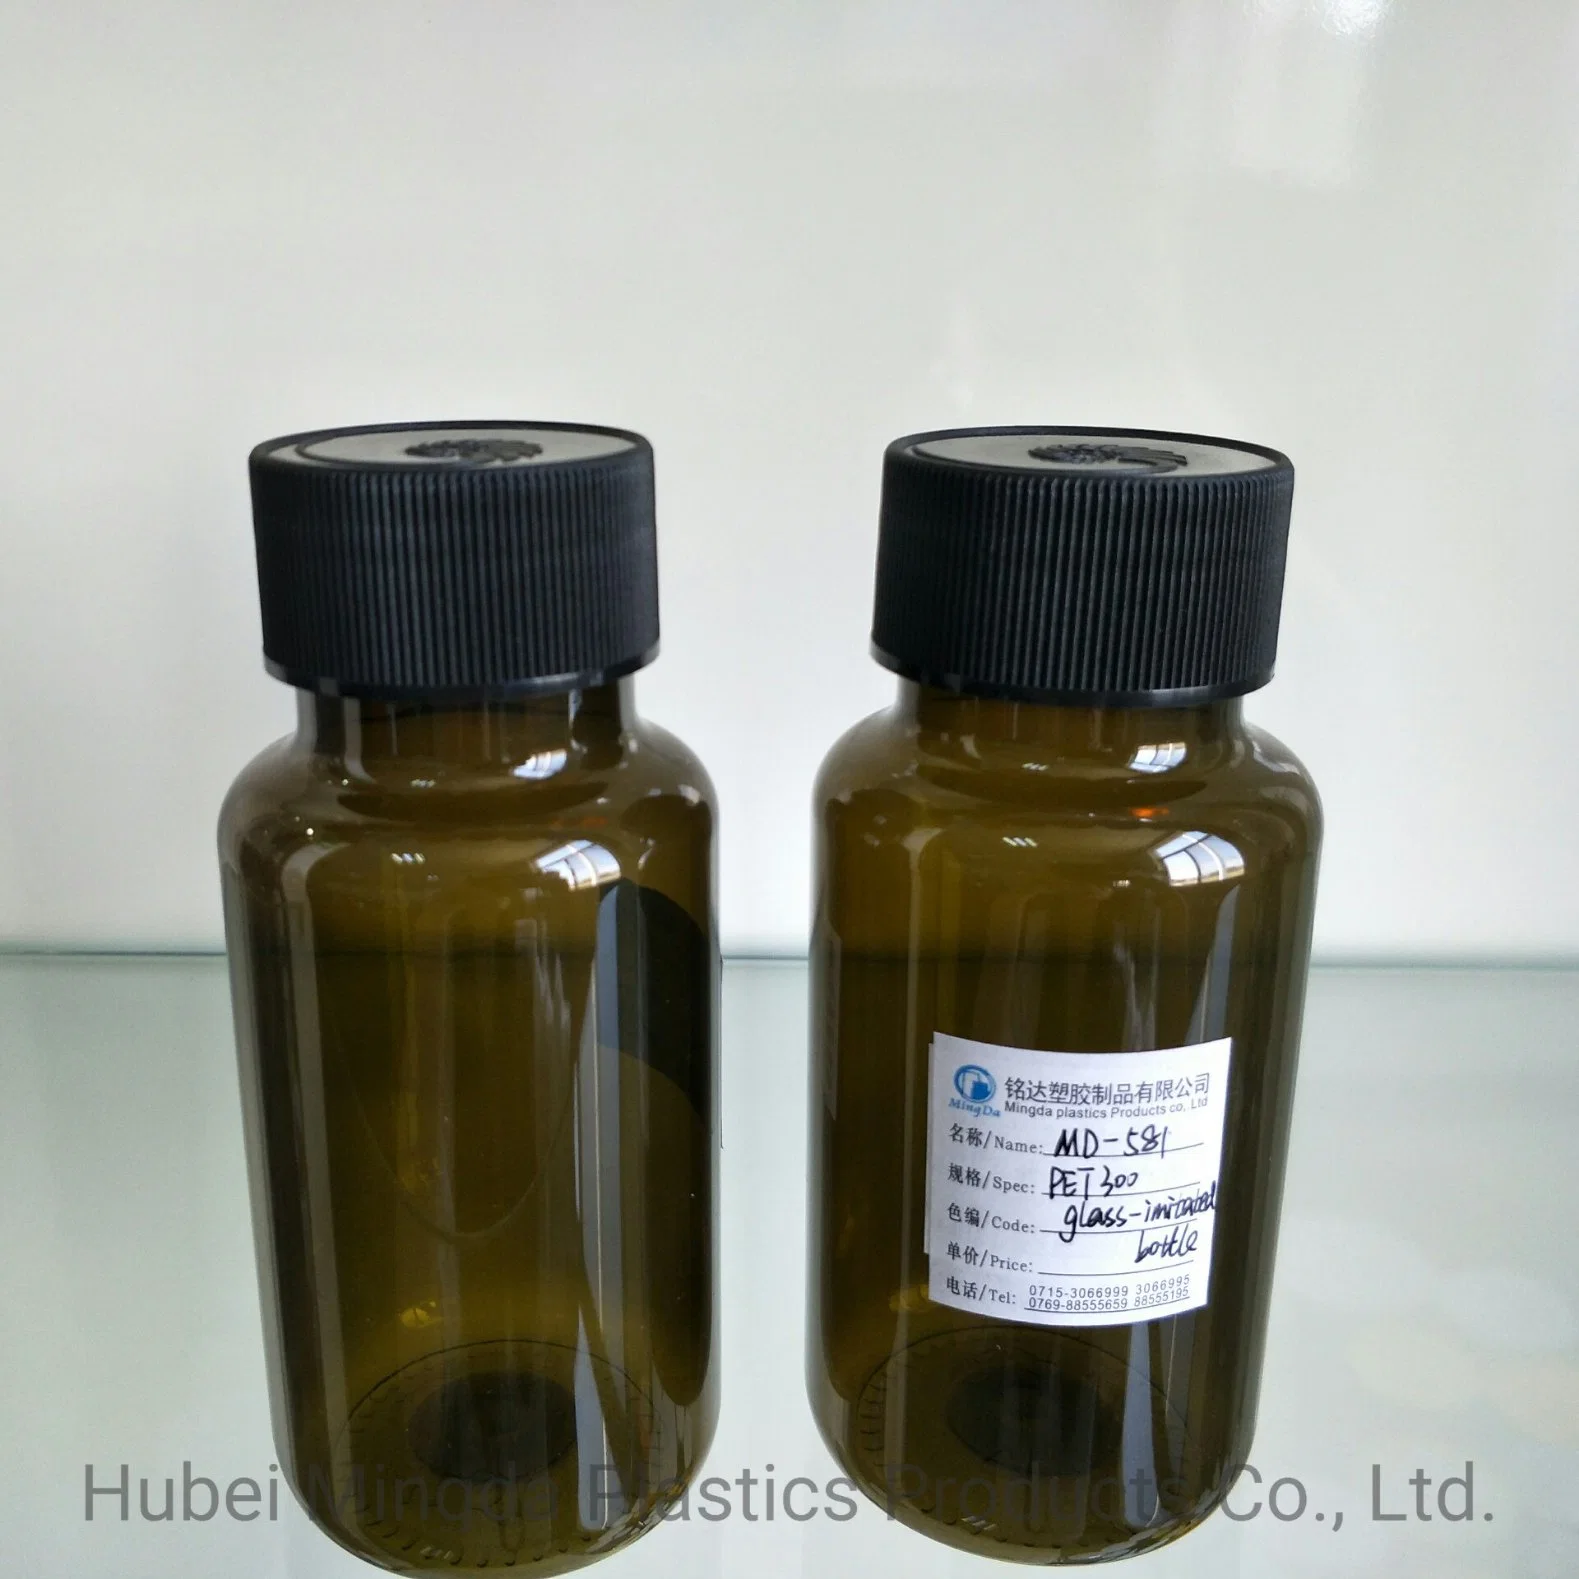 Pet 300ml Plastic Glass-Imitated Bottle for Medicine/Food/Capsule/Health Care Products Packaging